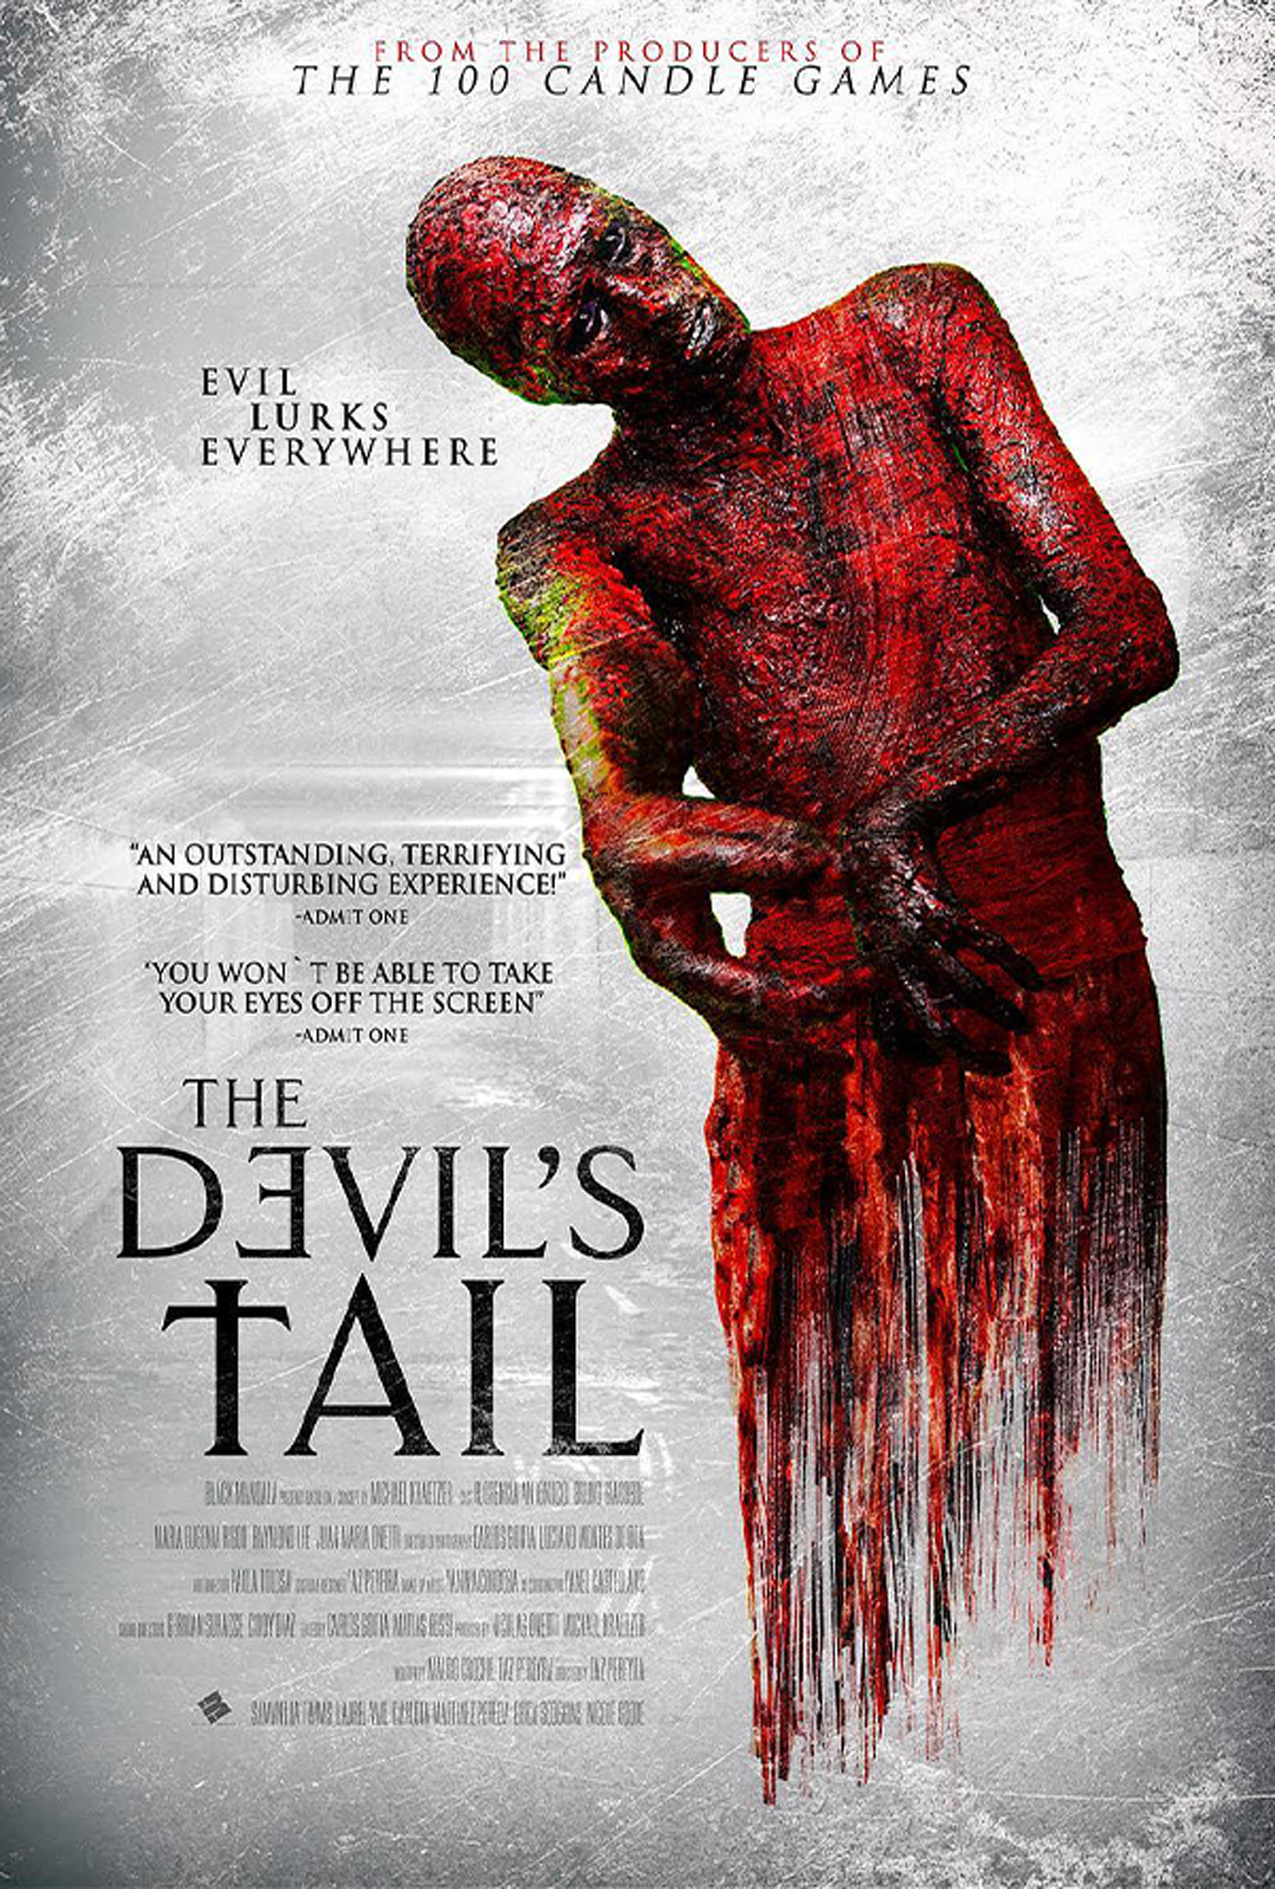 THE DEVIL’S TAIL